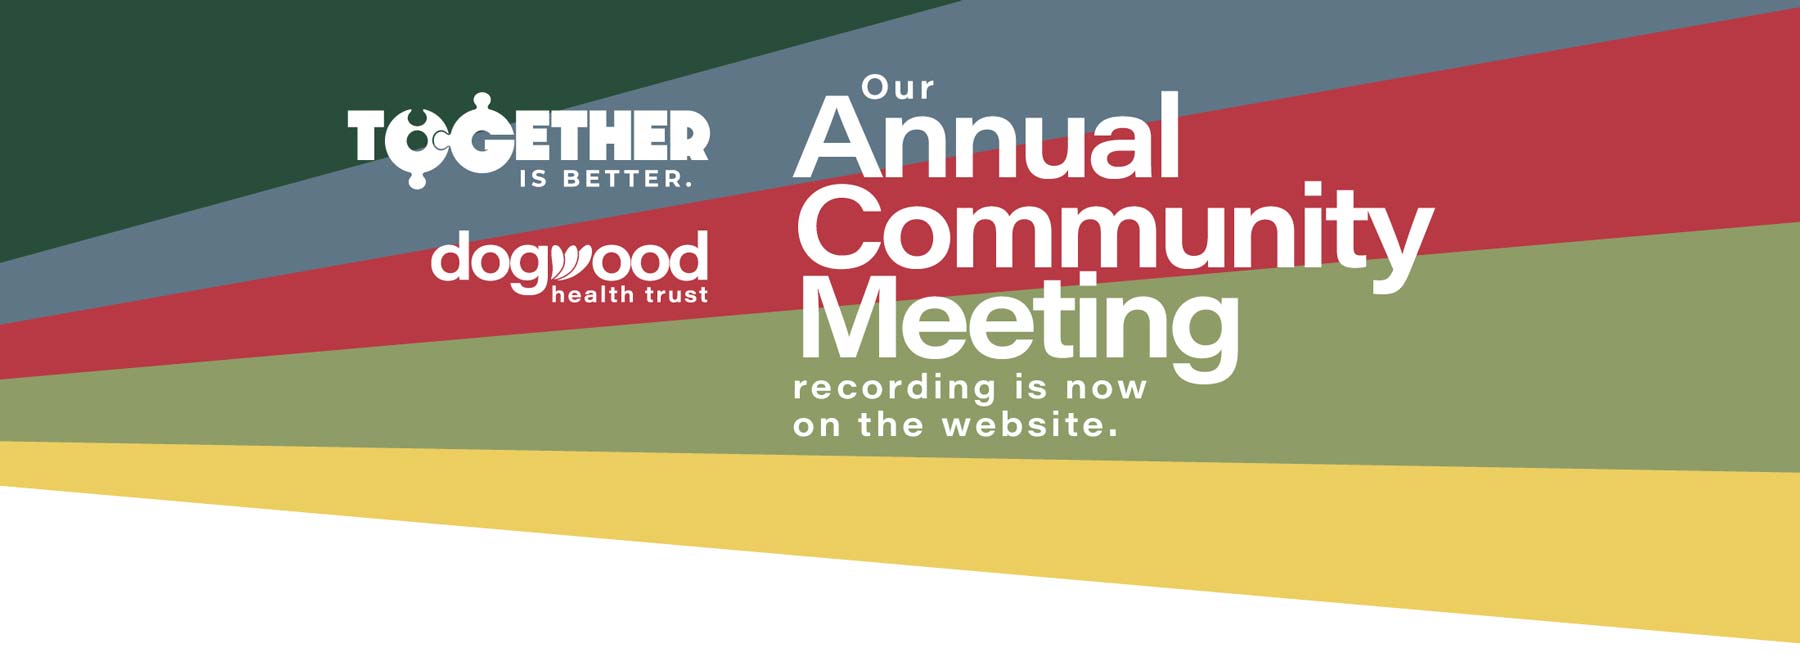 Annual Community Meeting banner